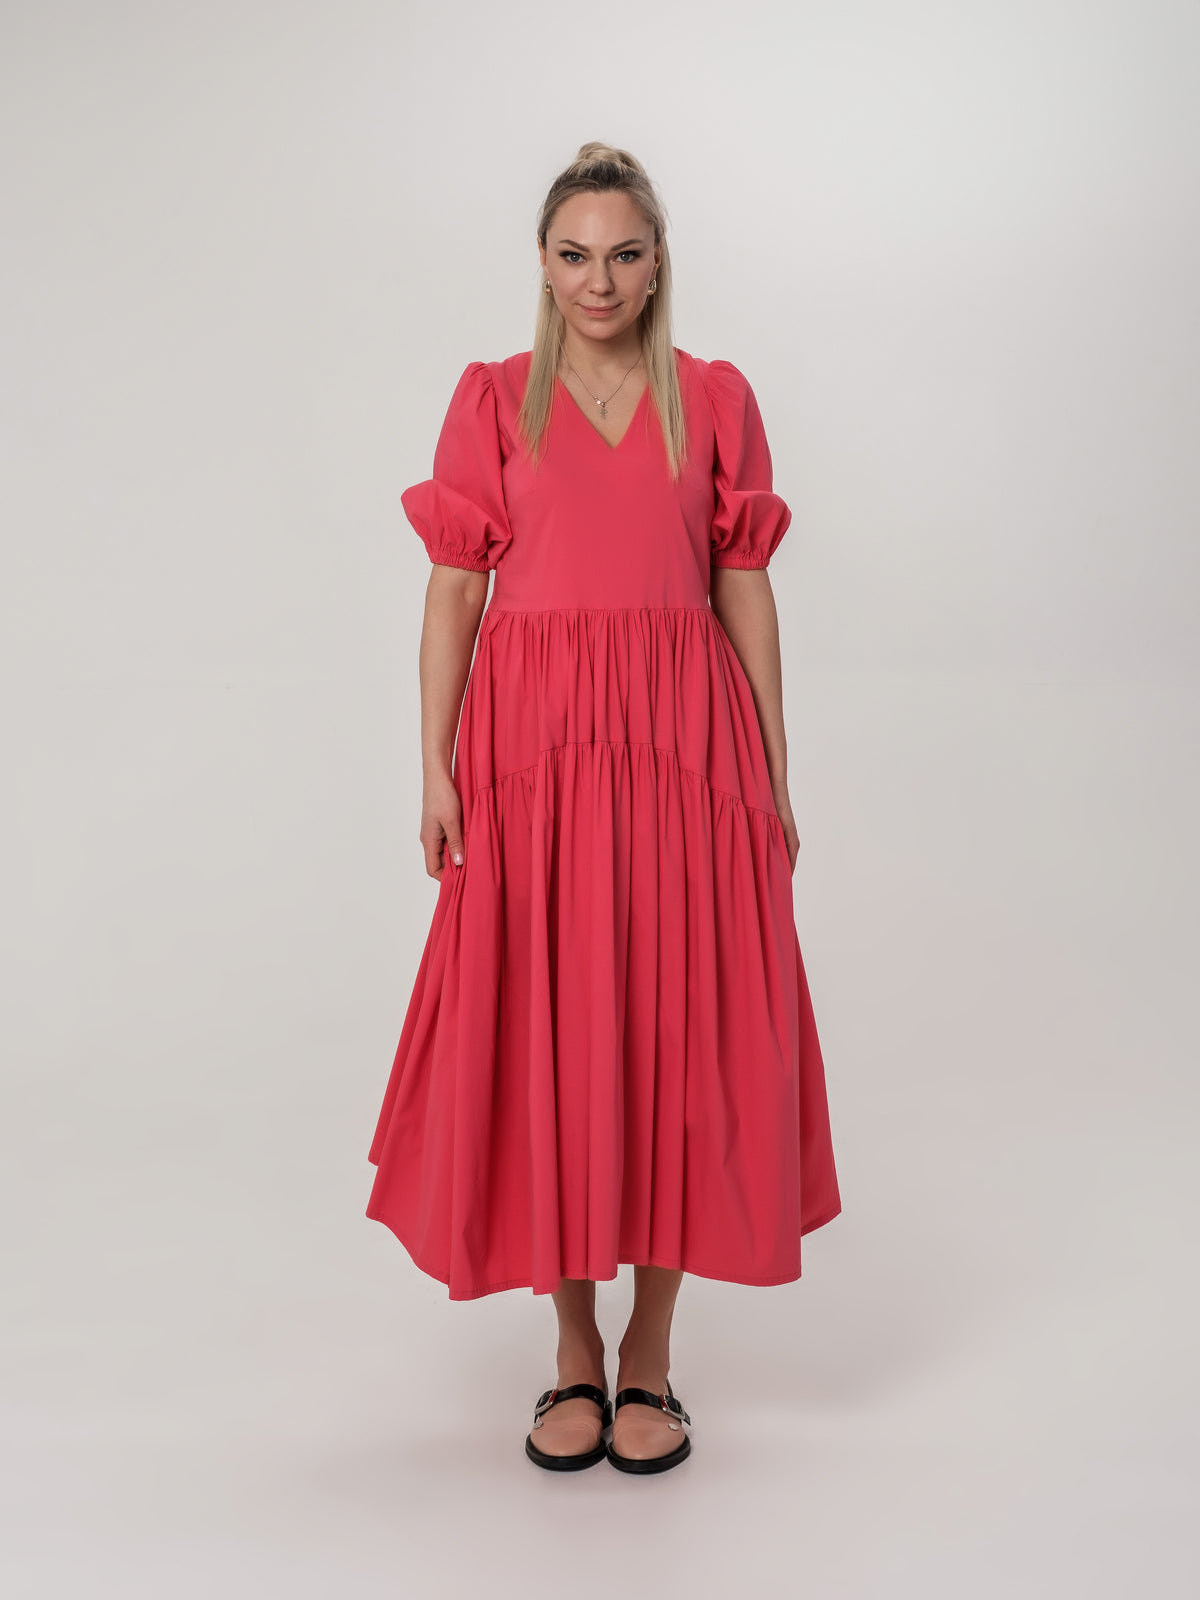 Cotton long bright coral pink summer dress with puff sleeves